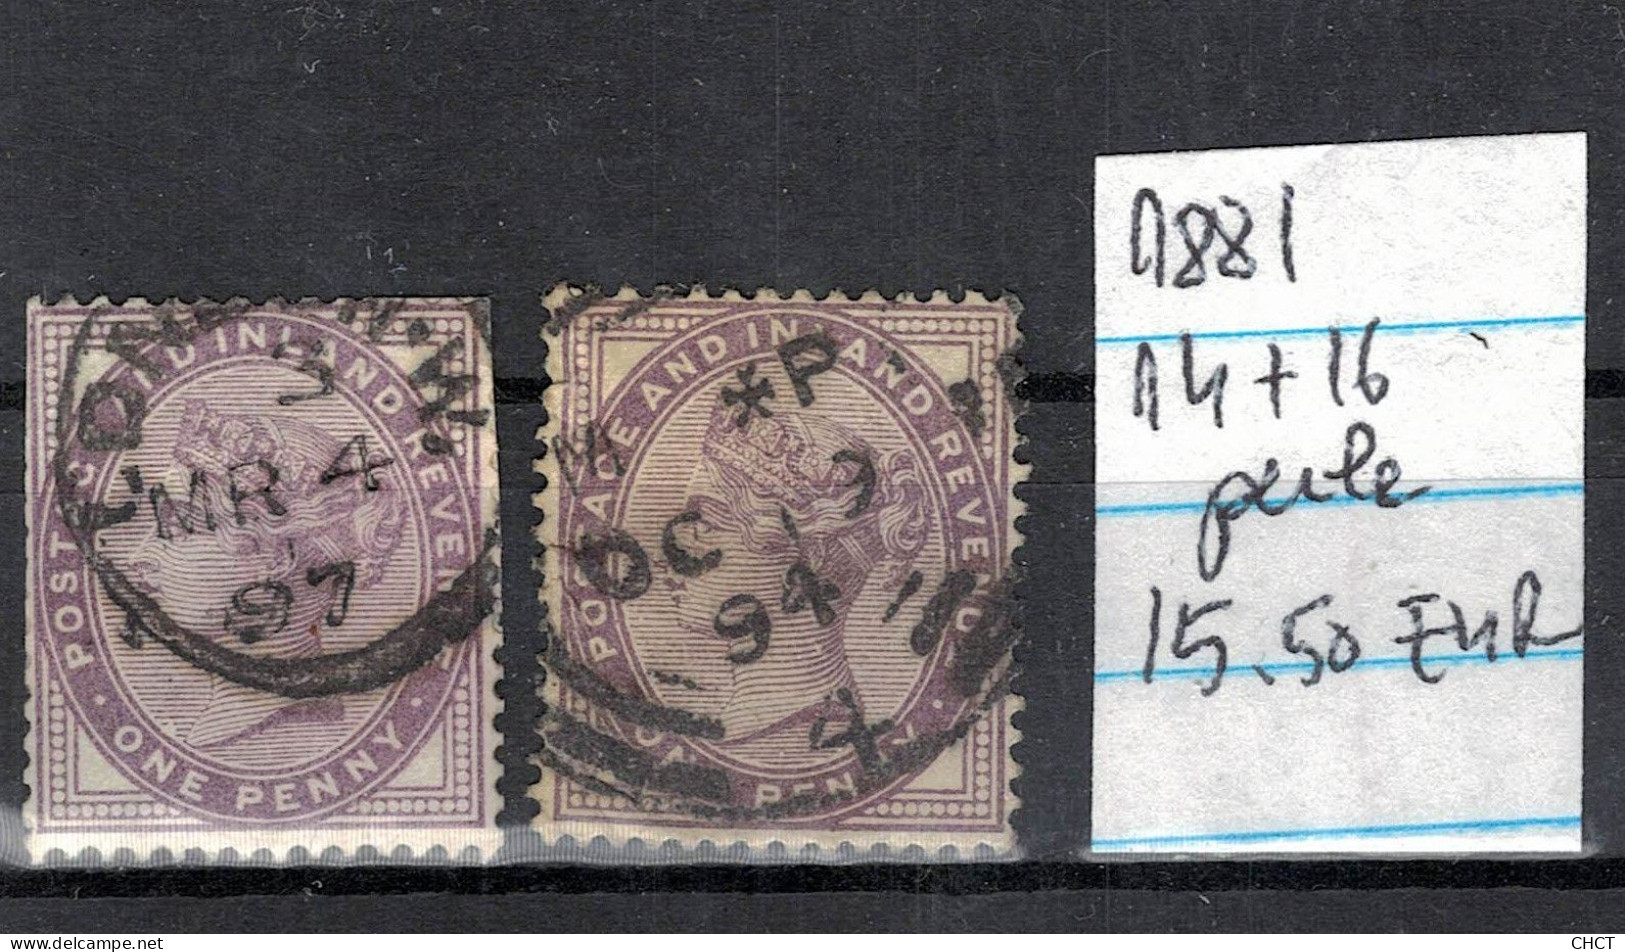 CHCT62 -  Queen Victoria, 14 & 16 Pearls, Used Stamps, 1881, Great Britain - Used Stamps